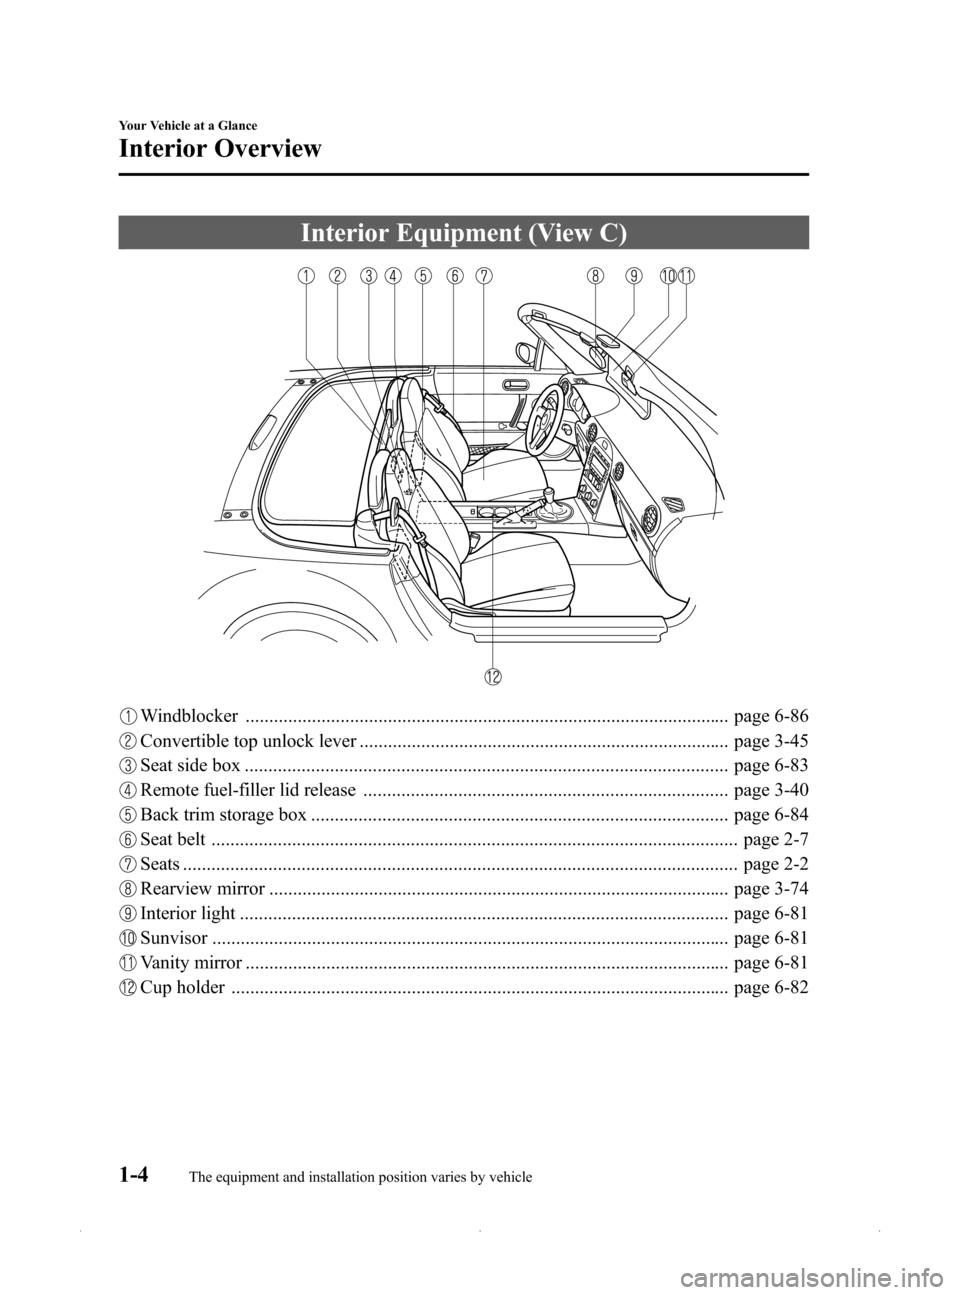 MAZDA MODEL MX-5 2015  Owners Manual (in English) Black plate (10,1)
Interior Equipment (View C)
Windblocker ...................................................................................................... page 6-86
Convertible top unlock lever